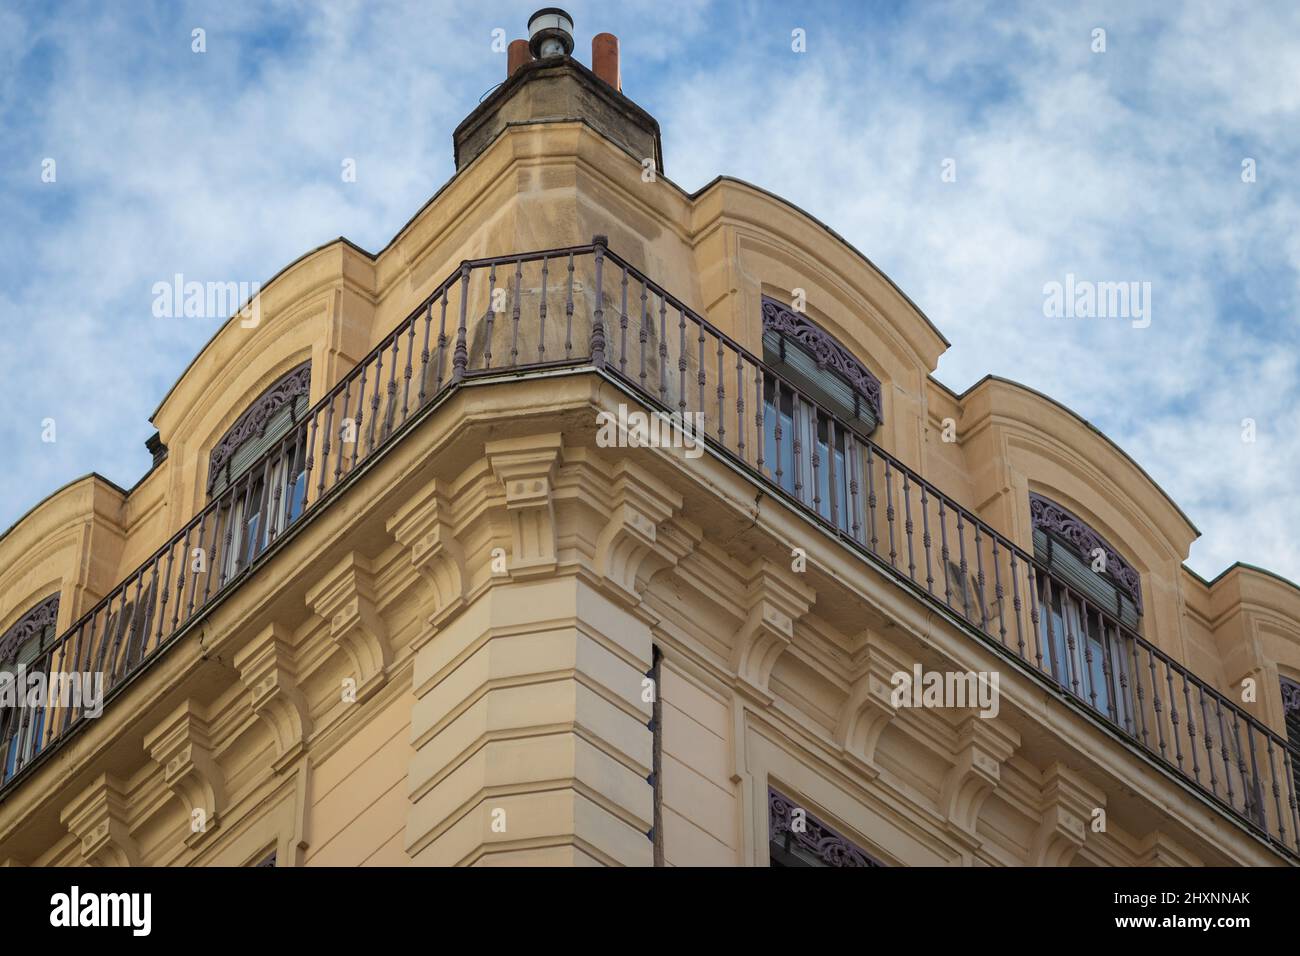 A beautiful building decorated in the old city of Lyon - France Stock Photo